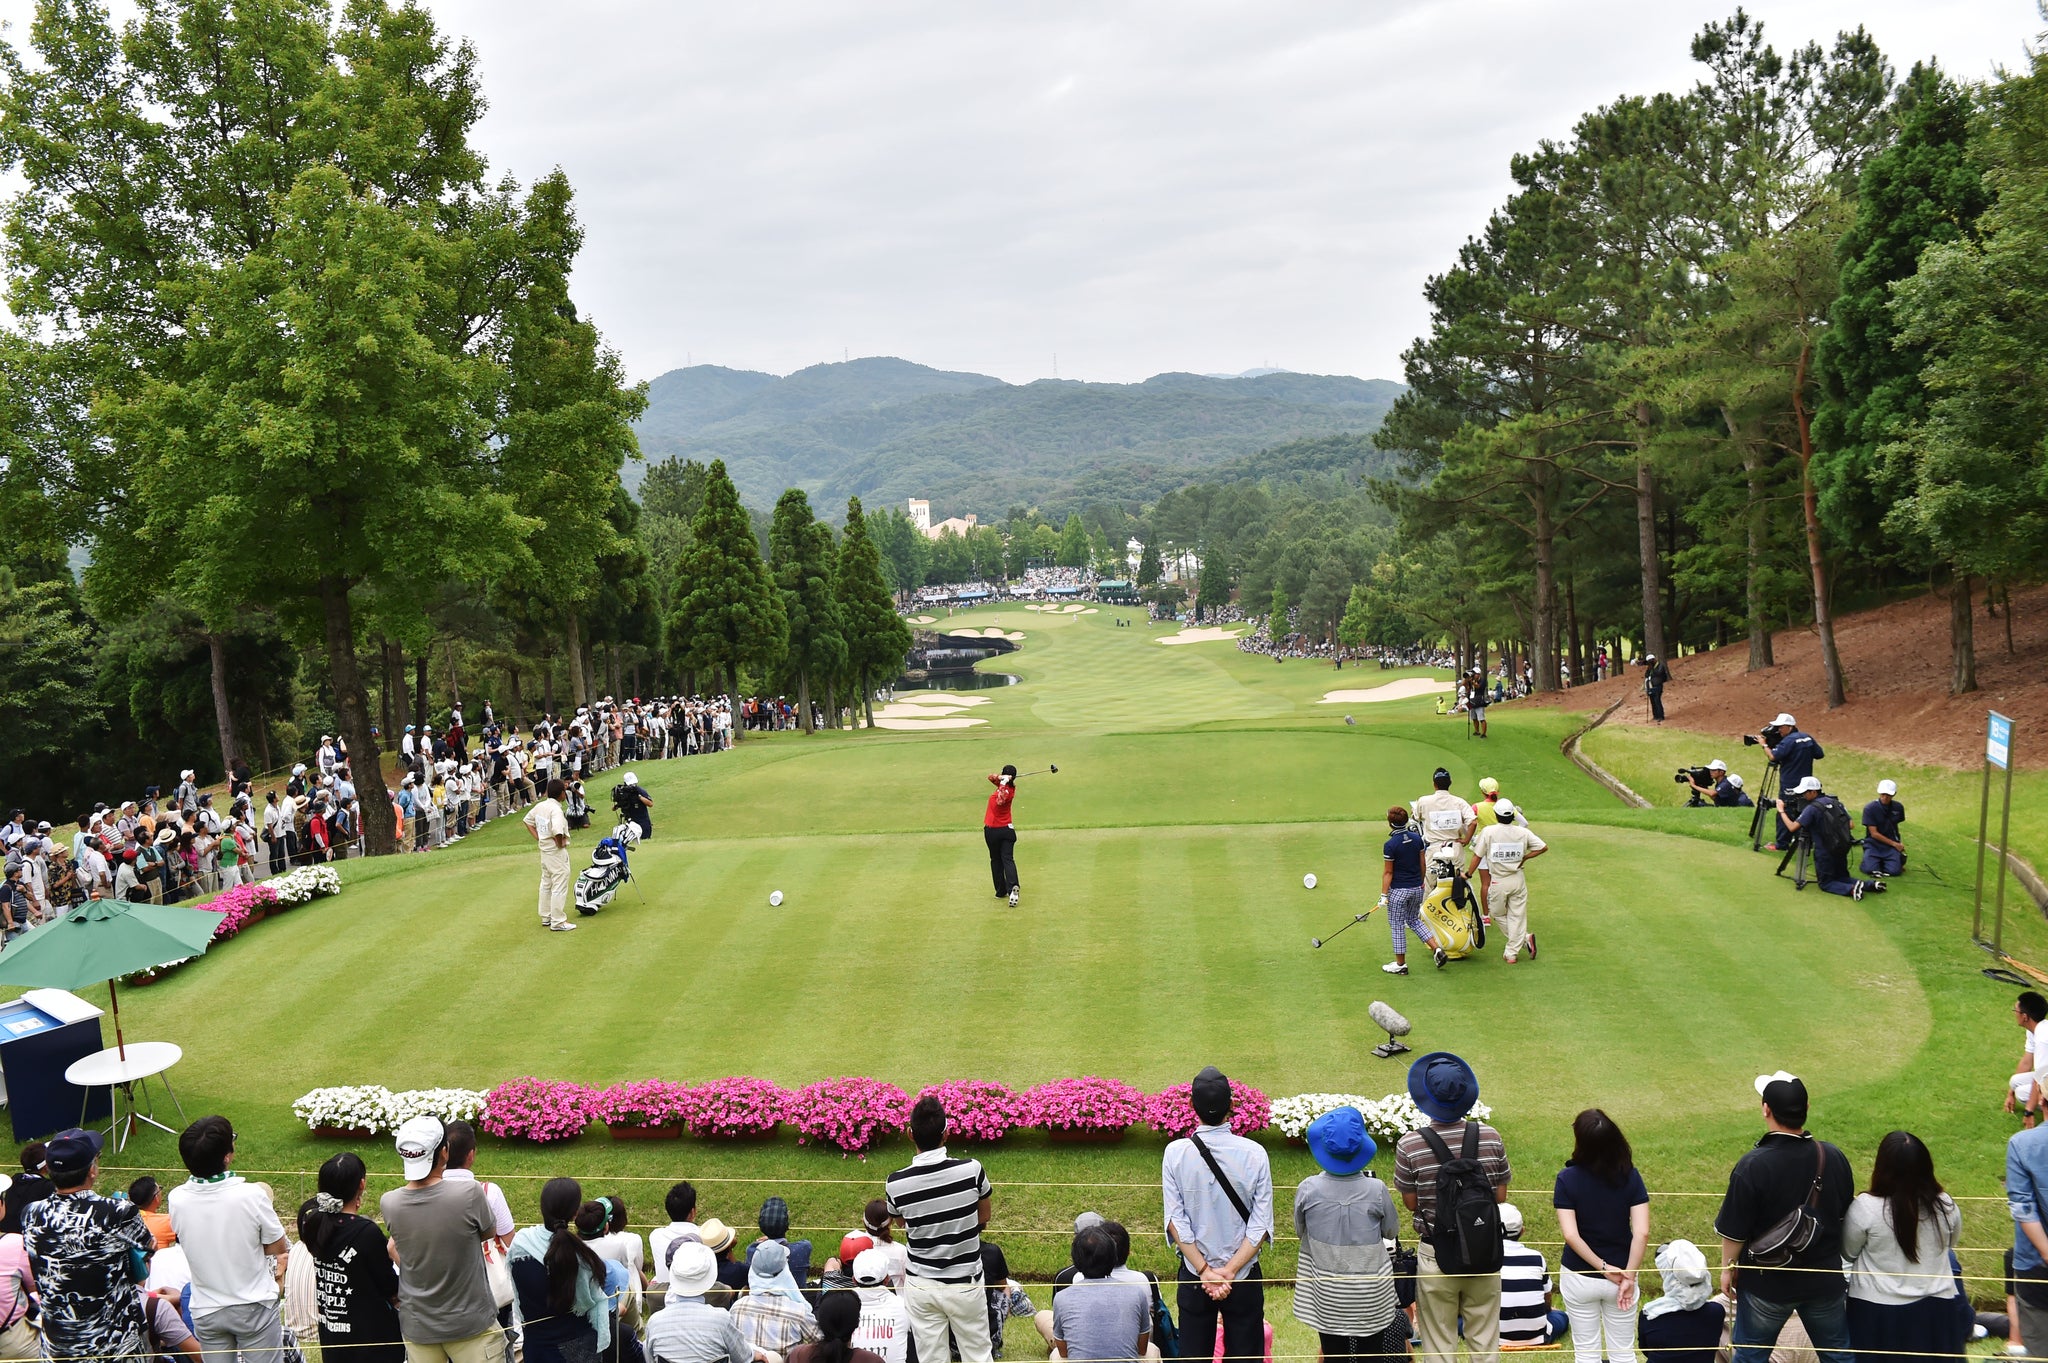 Golf is a popular sport in Japan, but a surplus of courses means that many lie abandoned